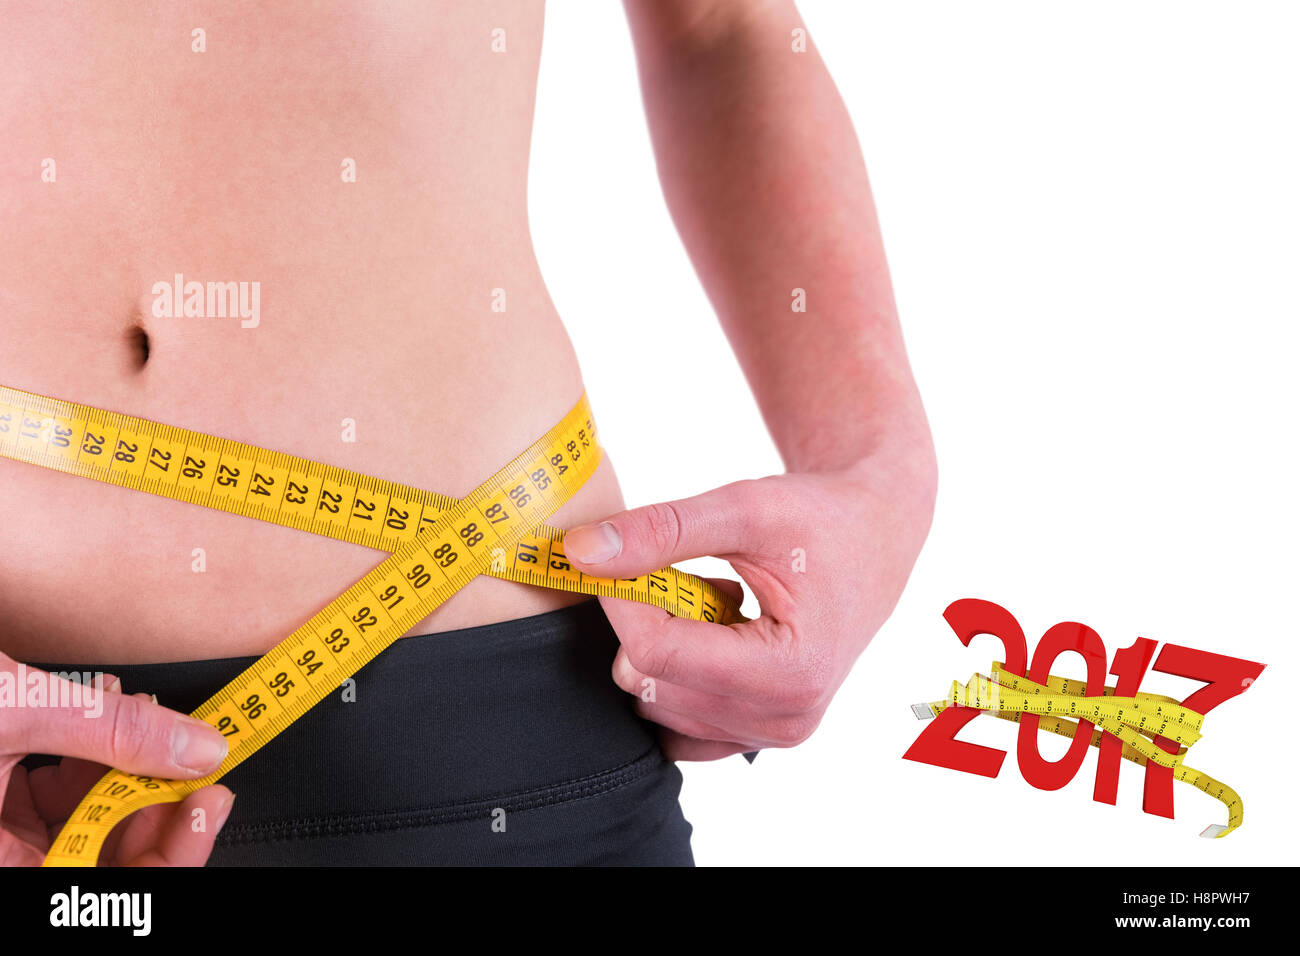 Man, body or measuring tape on waist on studio background for